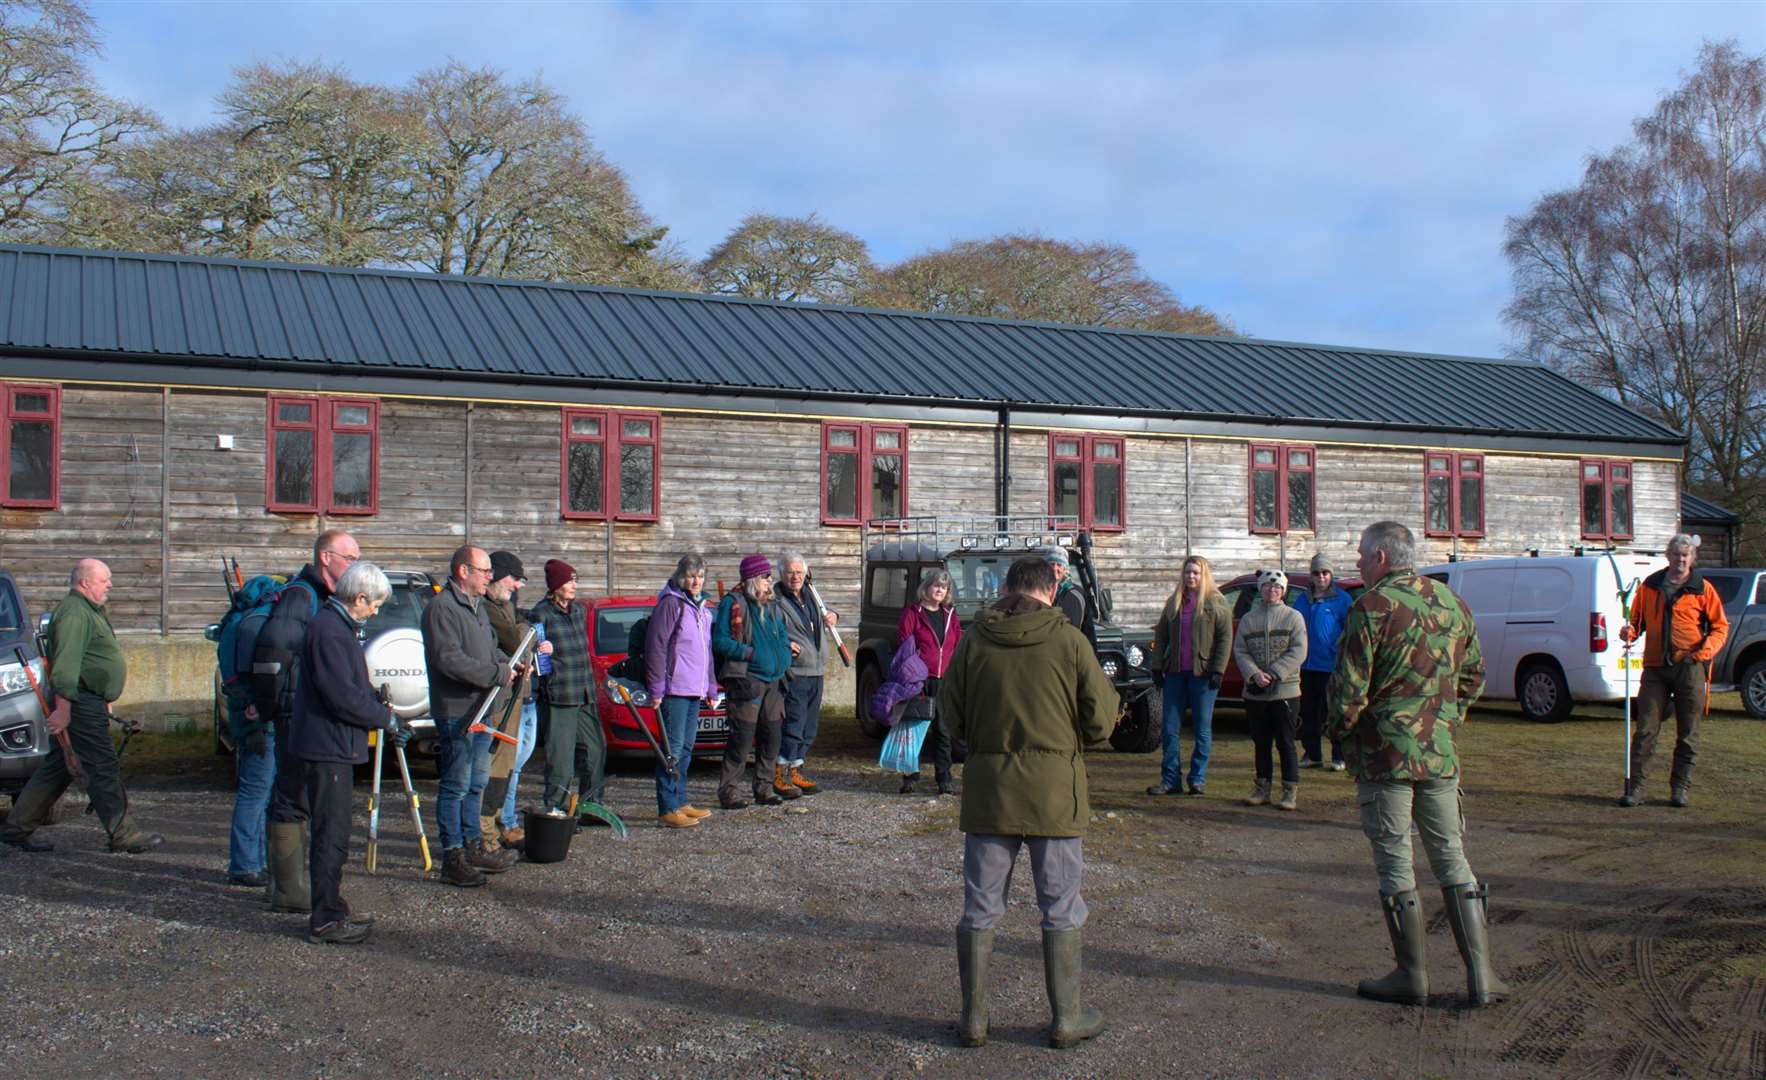 More than 30 friends of Culrain and District Hall turned up on March 16 to help clear paths at Carbisdale Wood.